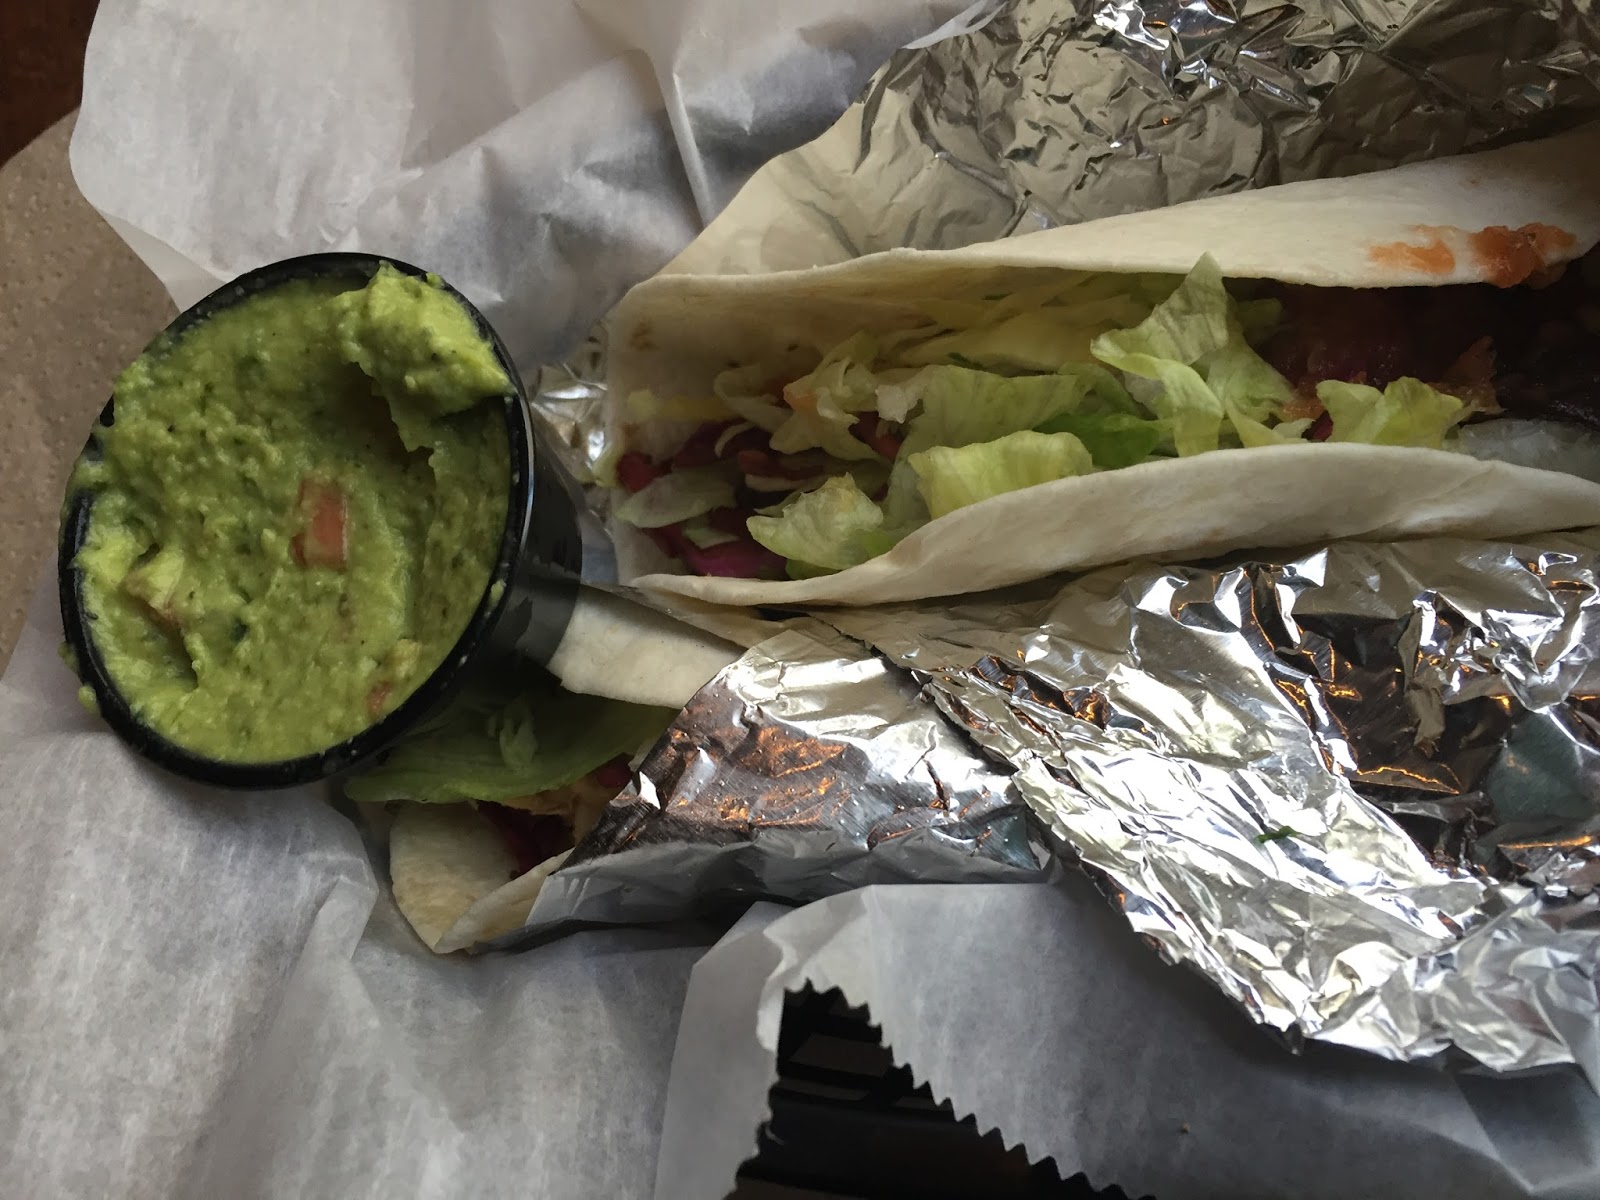 A Little Time and a Keyboard: Mixing It Up With Condado Tacos in Pittsburgh